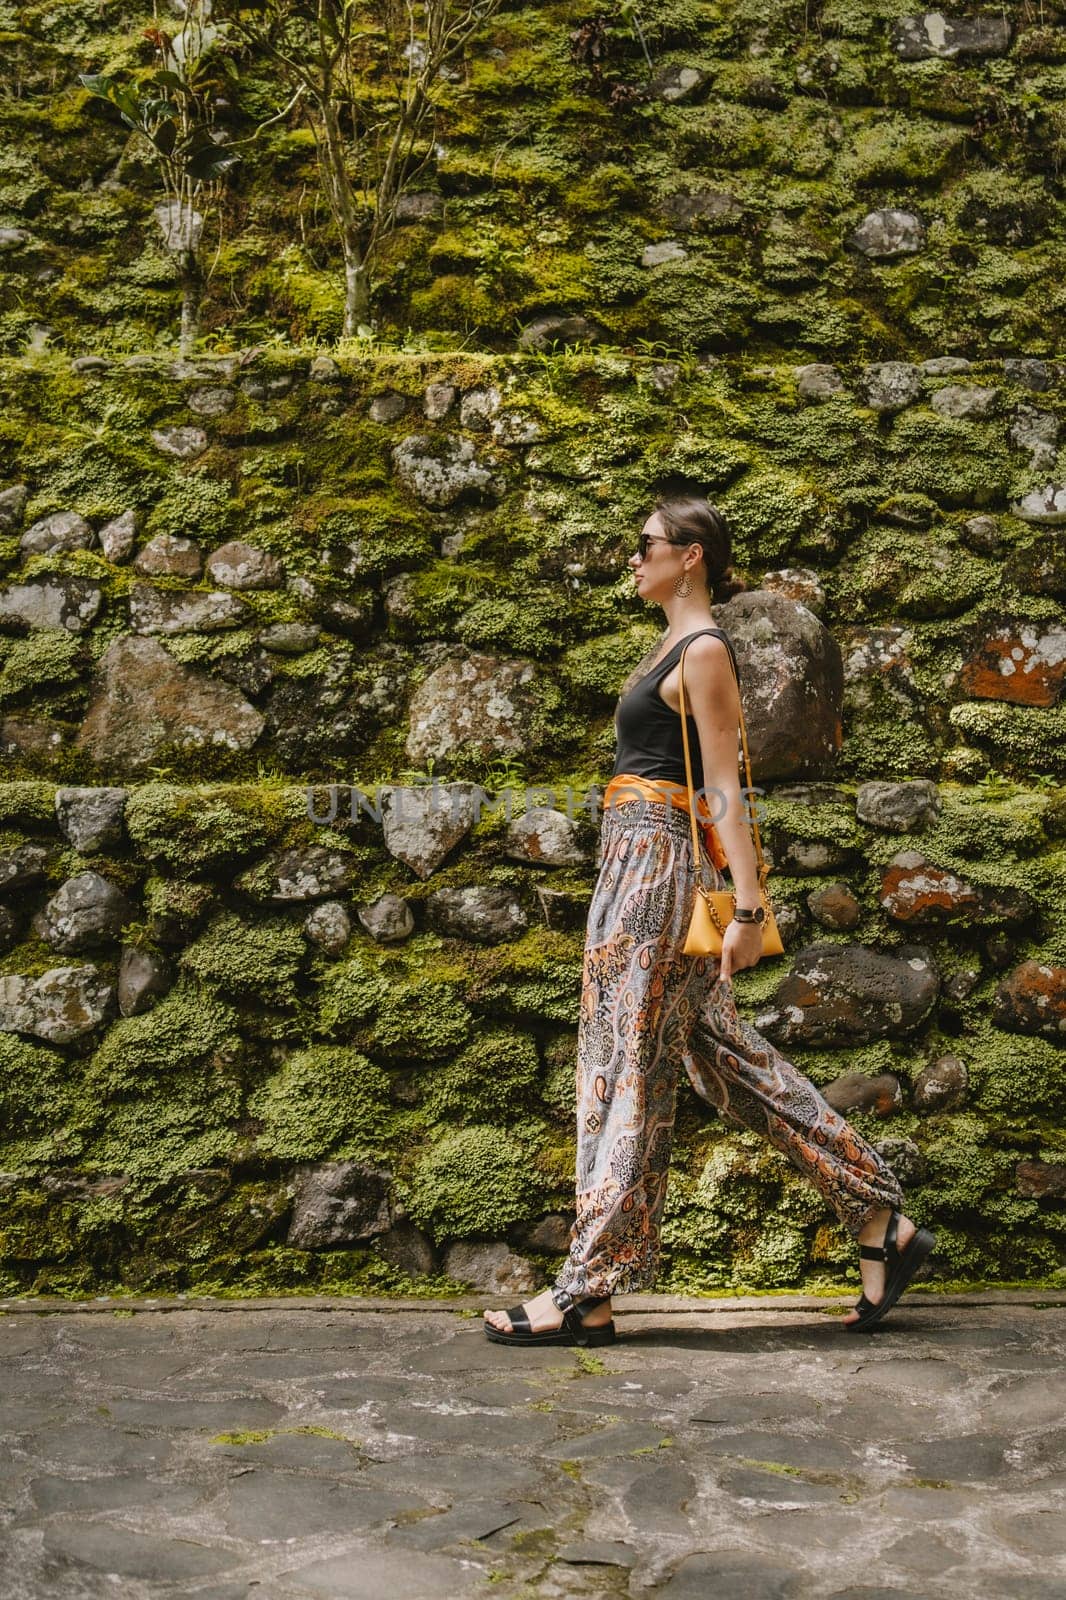 Walking young stylish girl on temple wall background. Puru Gunung Kawi ancient architecture, female tourist in rocky temple